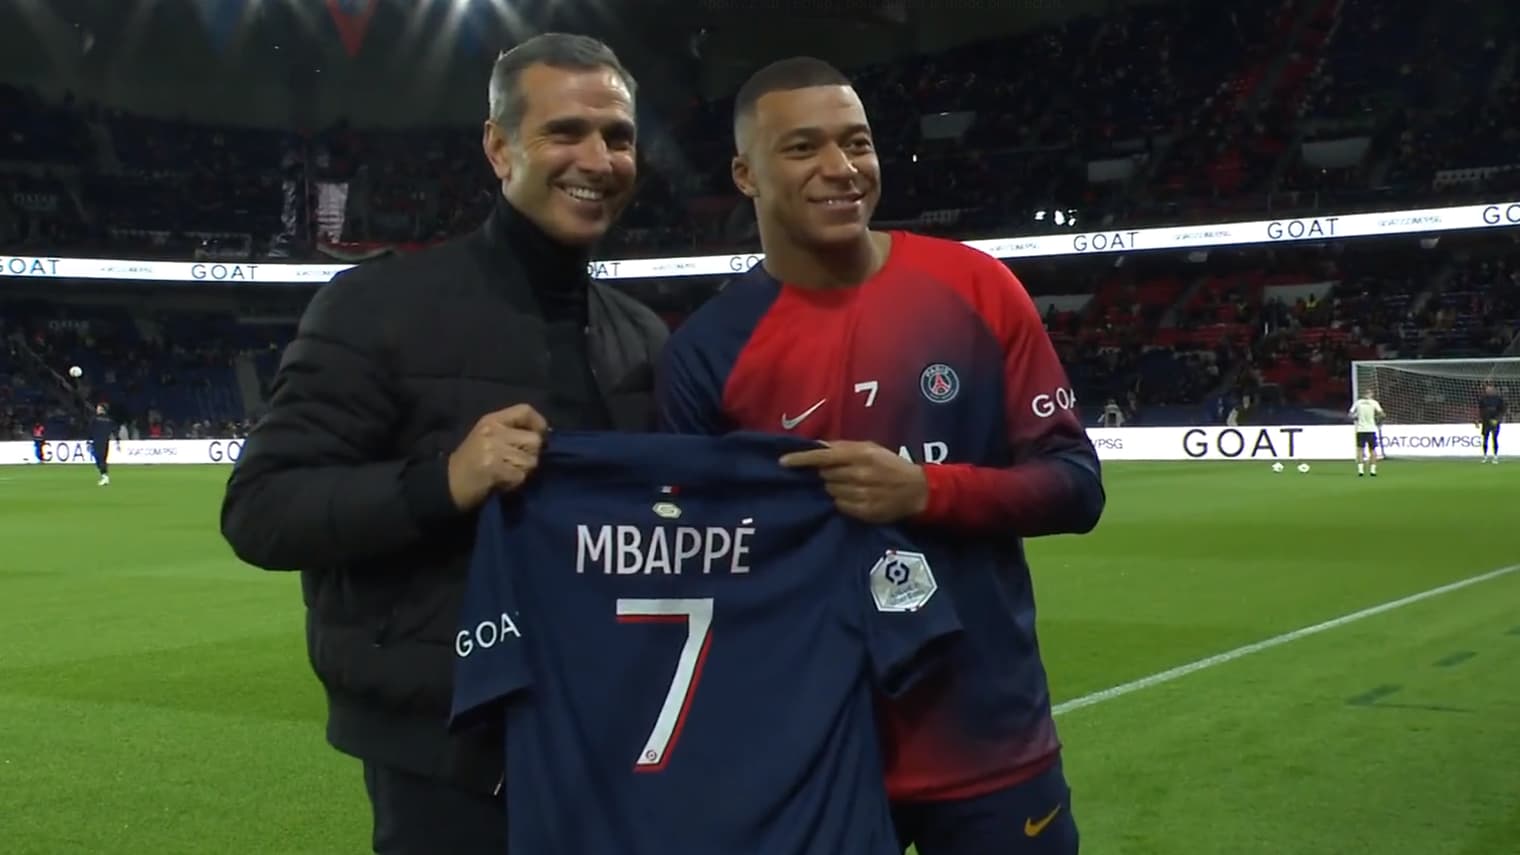 Why does Mbappe play in a special shirt?